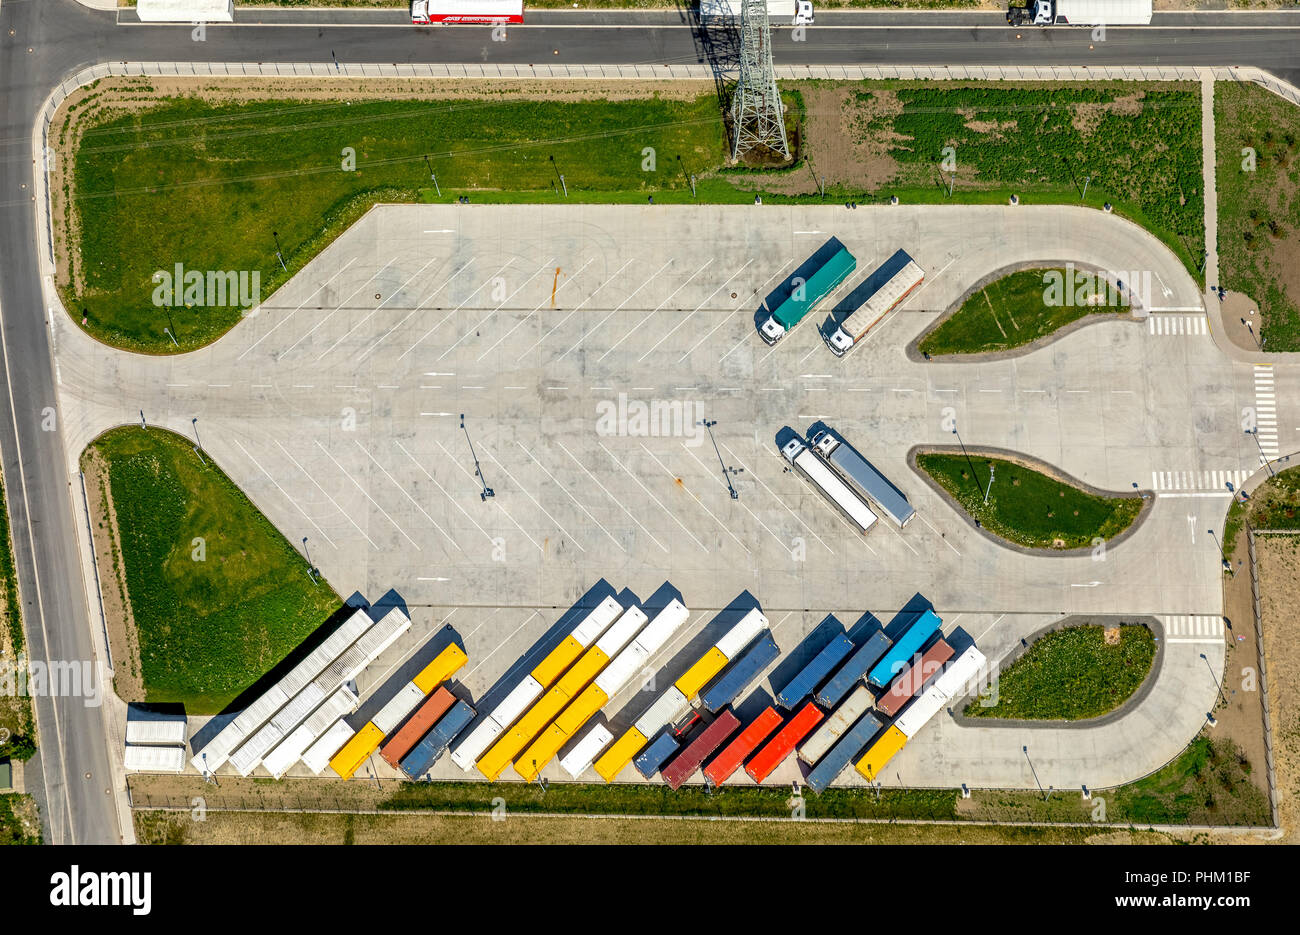 Aerial photo, AMAZON logistics centre Werne, truck parking lot,  just-in-time delivery, Carl-Zeiss-Straße, Werne, Ruhrgebiet, North  Rhine-Westphalia, G Stock Photo - Alamy